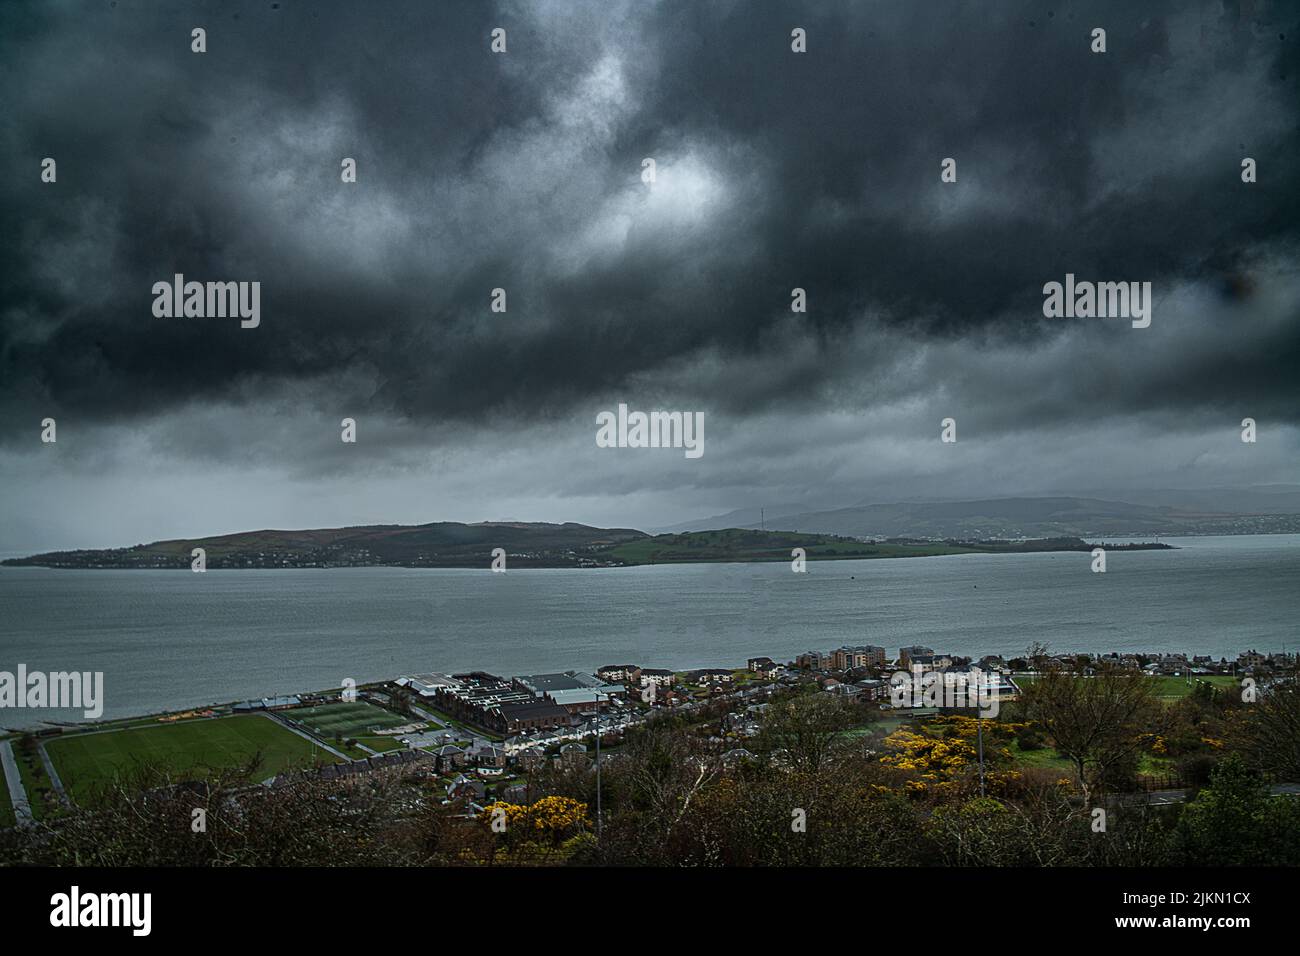 A scenic view of the seashore by the tranquil water under the stormy sky Stock Photo